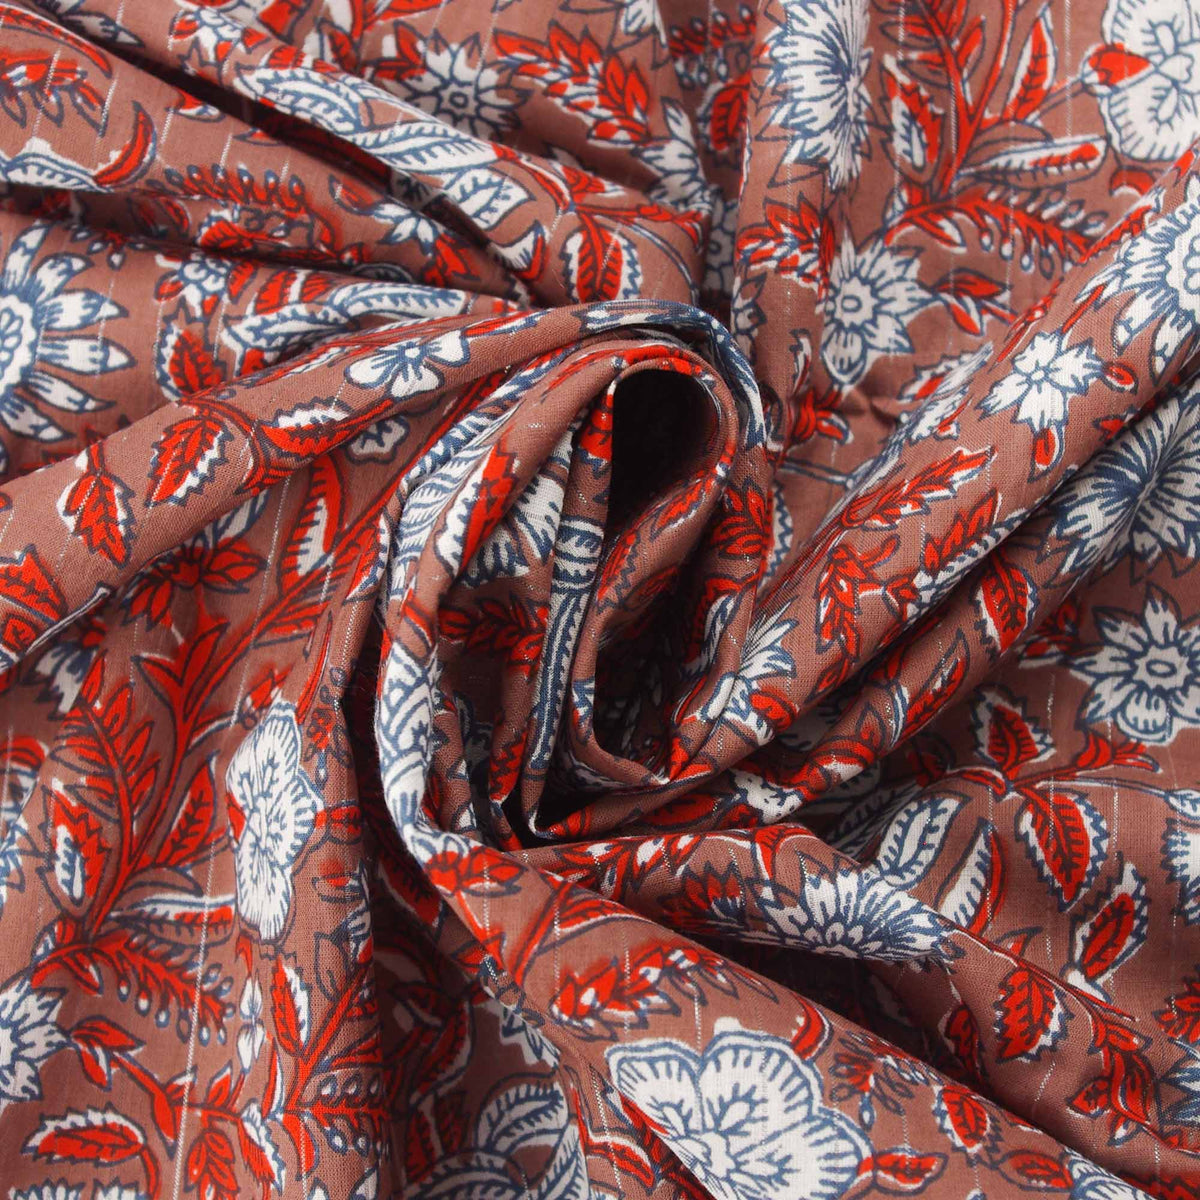 Hand Screen Printed 100% Cotton Fabric - Red Vines On Brown With Silver Lines (Design 385)